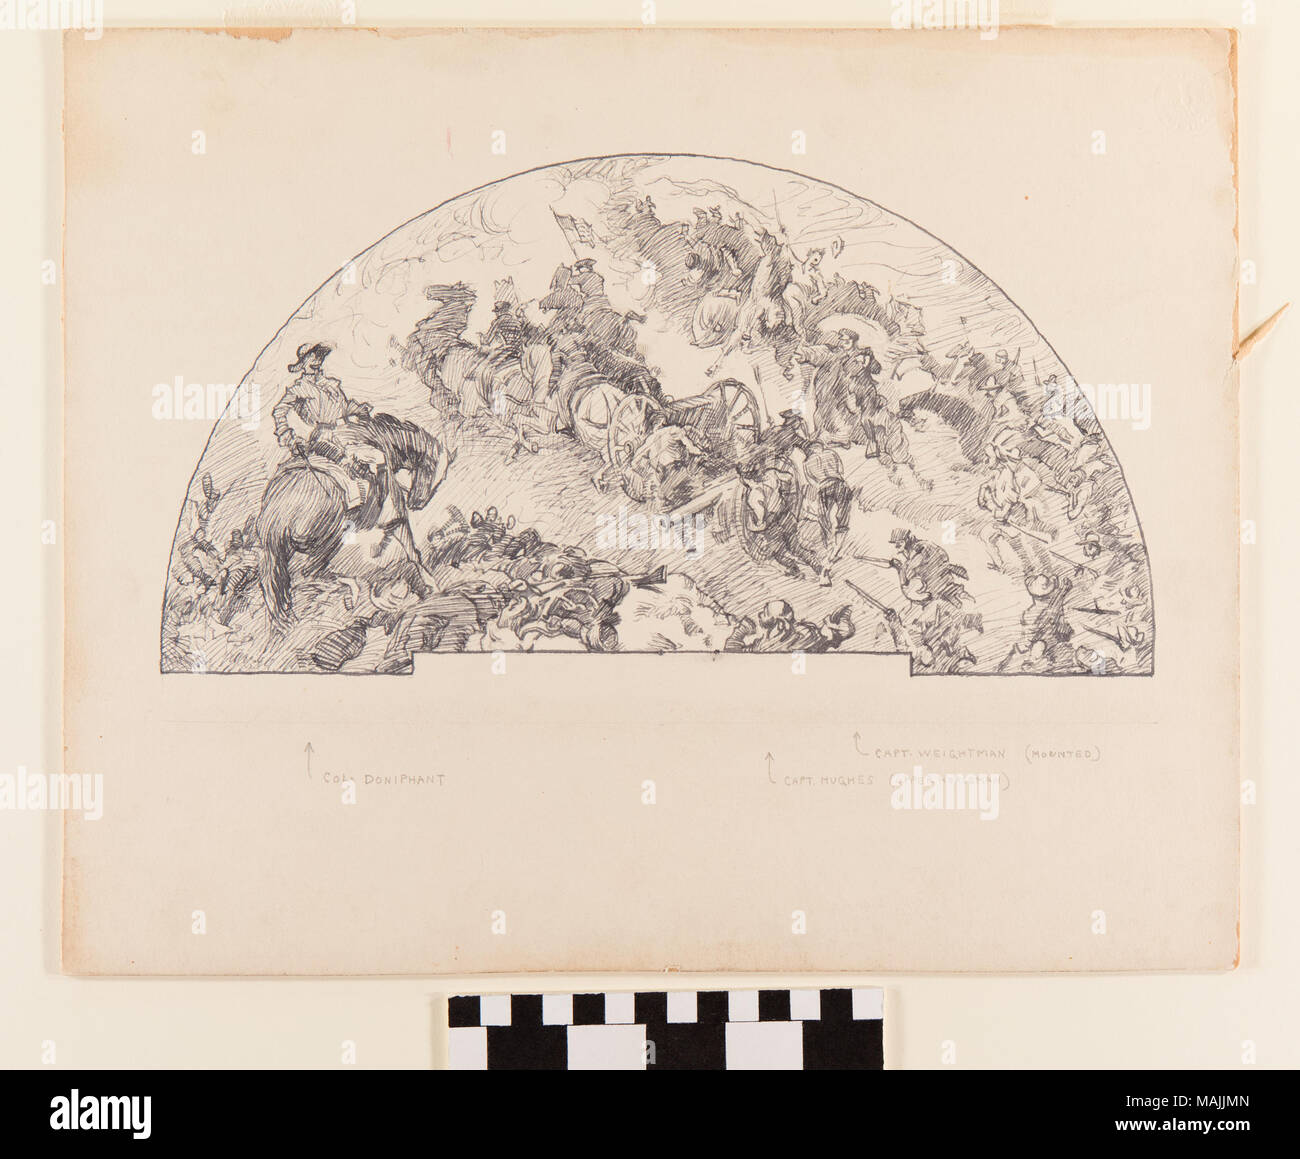 https://c8.alamy.com/comp/MAJJMN/ink-and-pencil-drawing-on-art-board-of-a-battle-scene-in-a-semicircular-shape-the-final-mural-is-located-in-the-missouri-state-capitol-building-title-drawing-of-battle-of-sacremento-mural-by-fred-g-carpenter-1921-carpenter-fred-green-1882-1965-MAJJMN.jpg